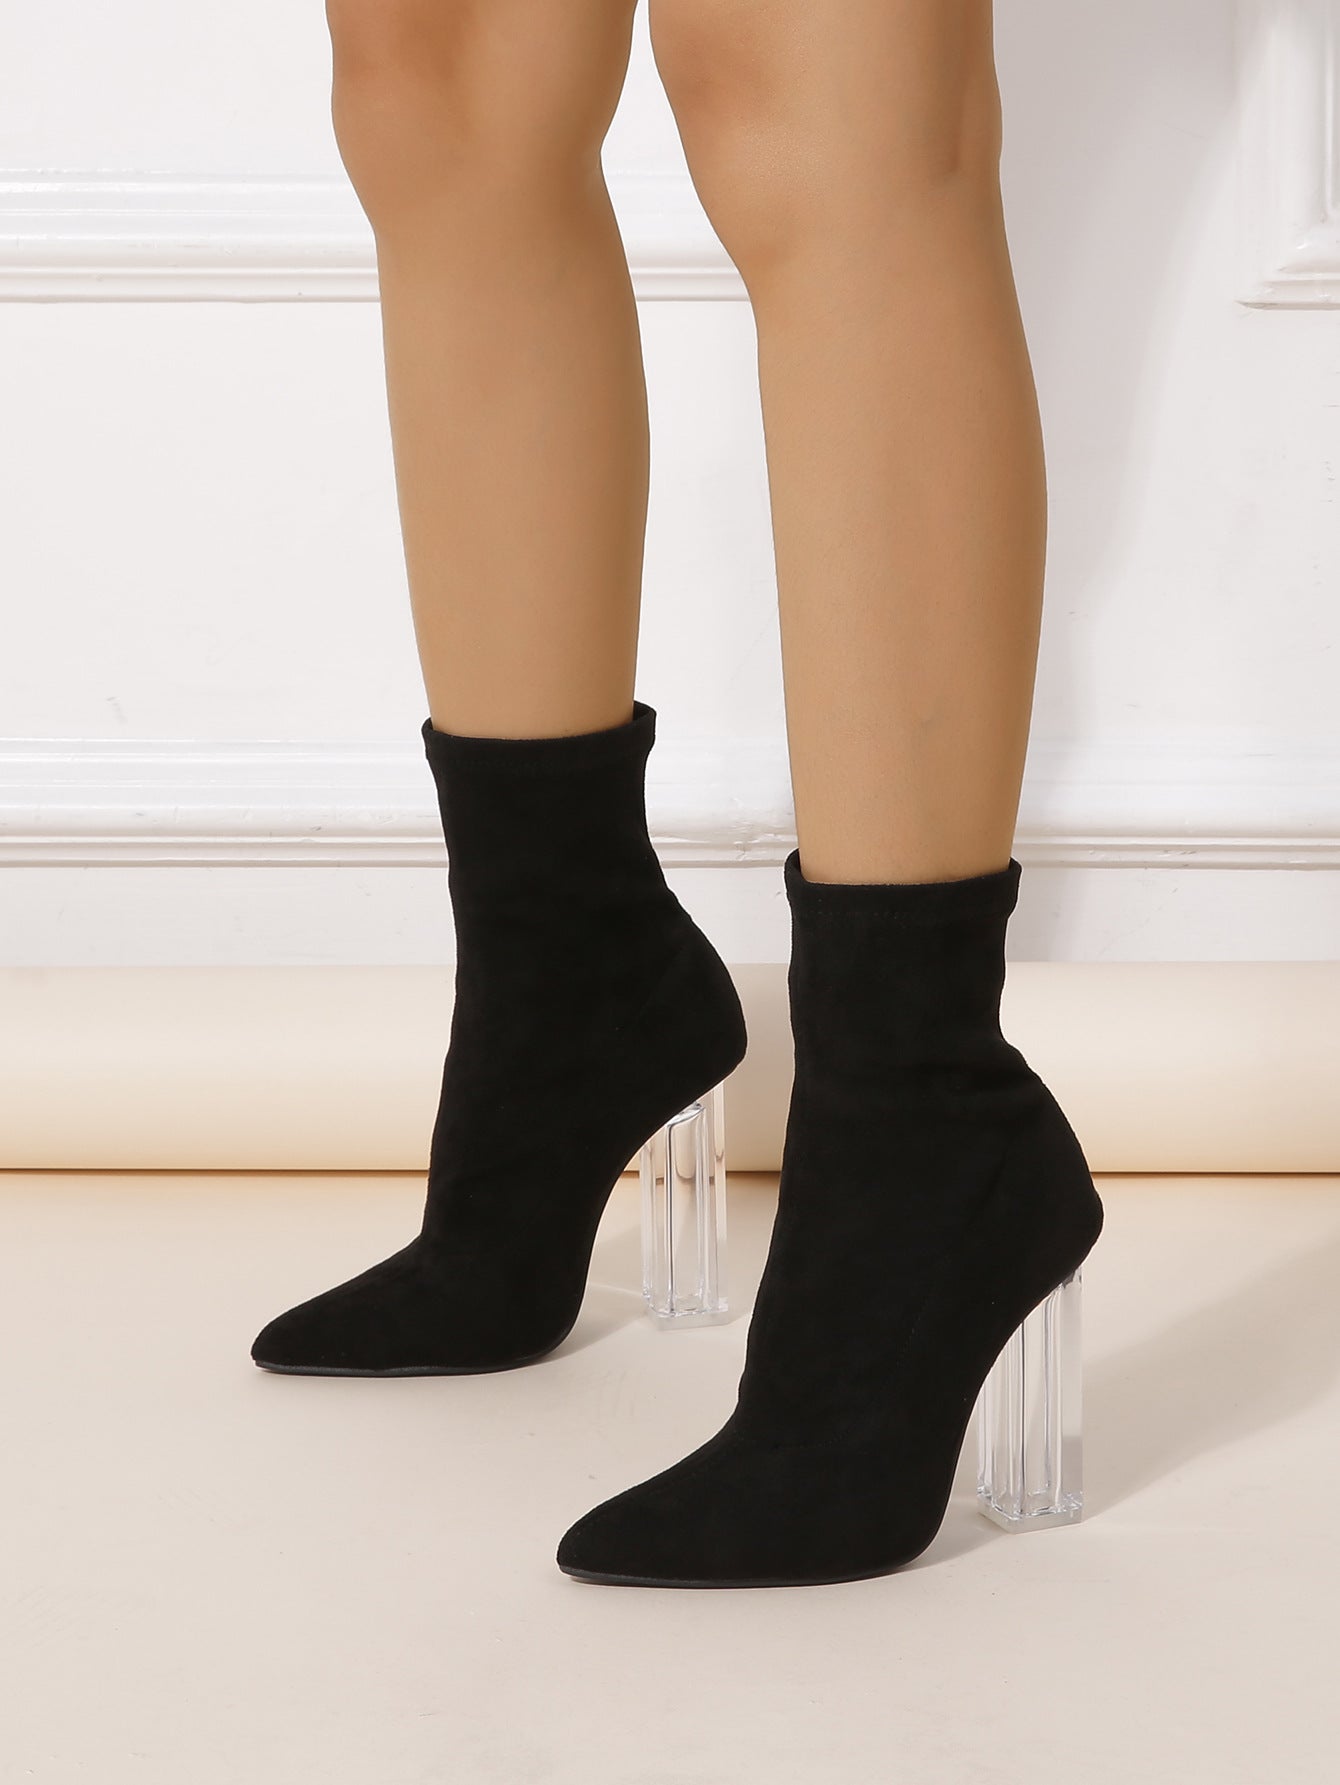 Fashionsarah.com Suede Middle Tube Boots